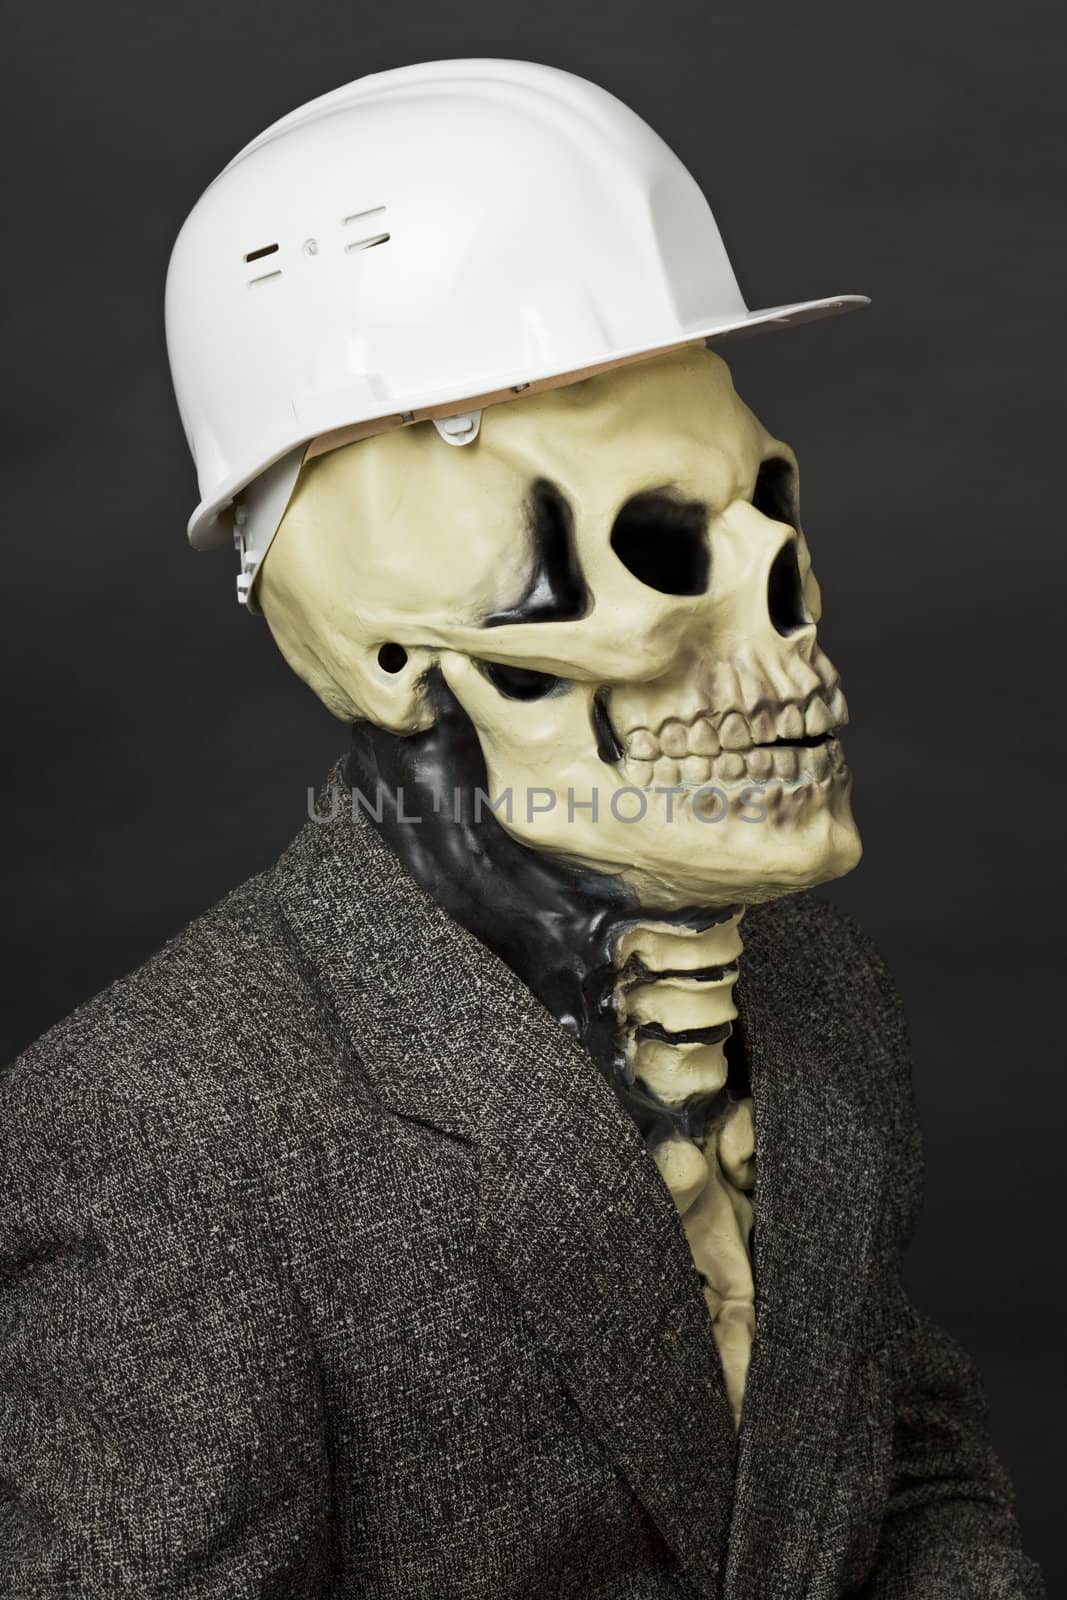 The deadly construction superintendent in a white protective helmet